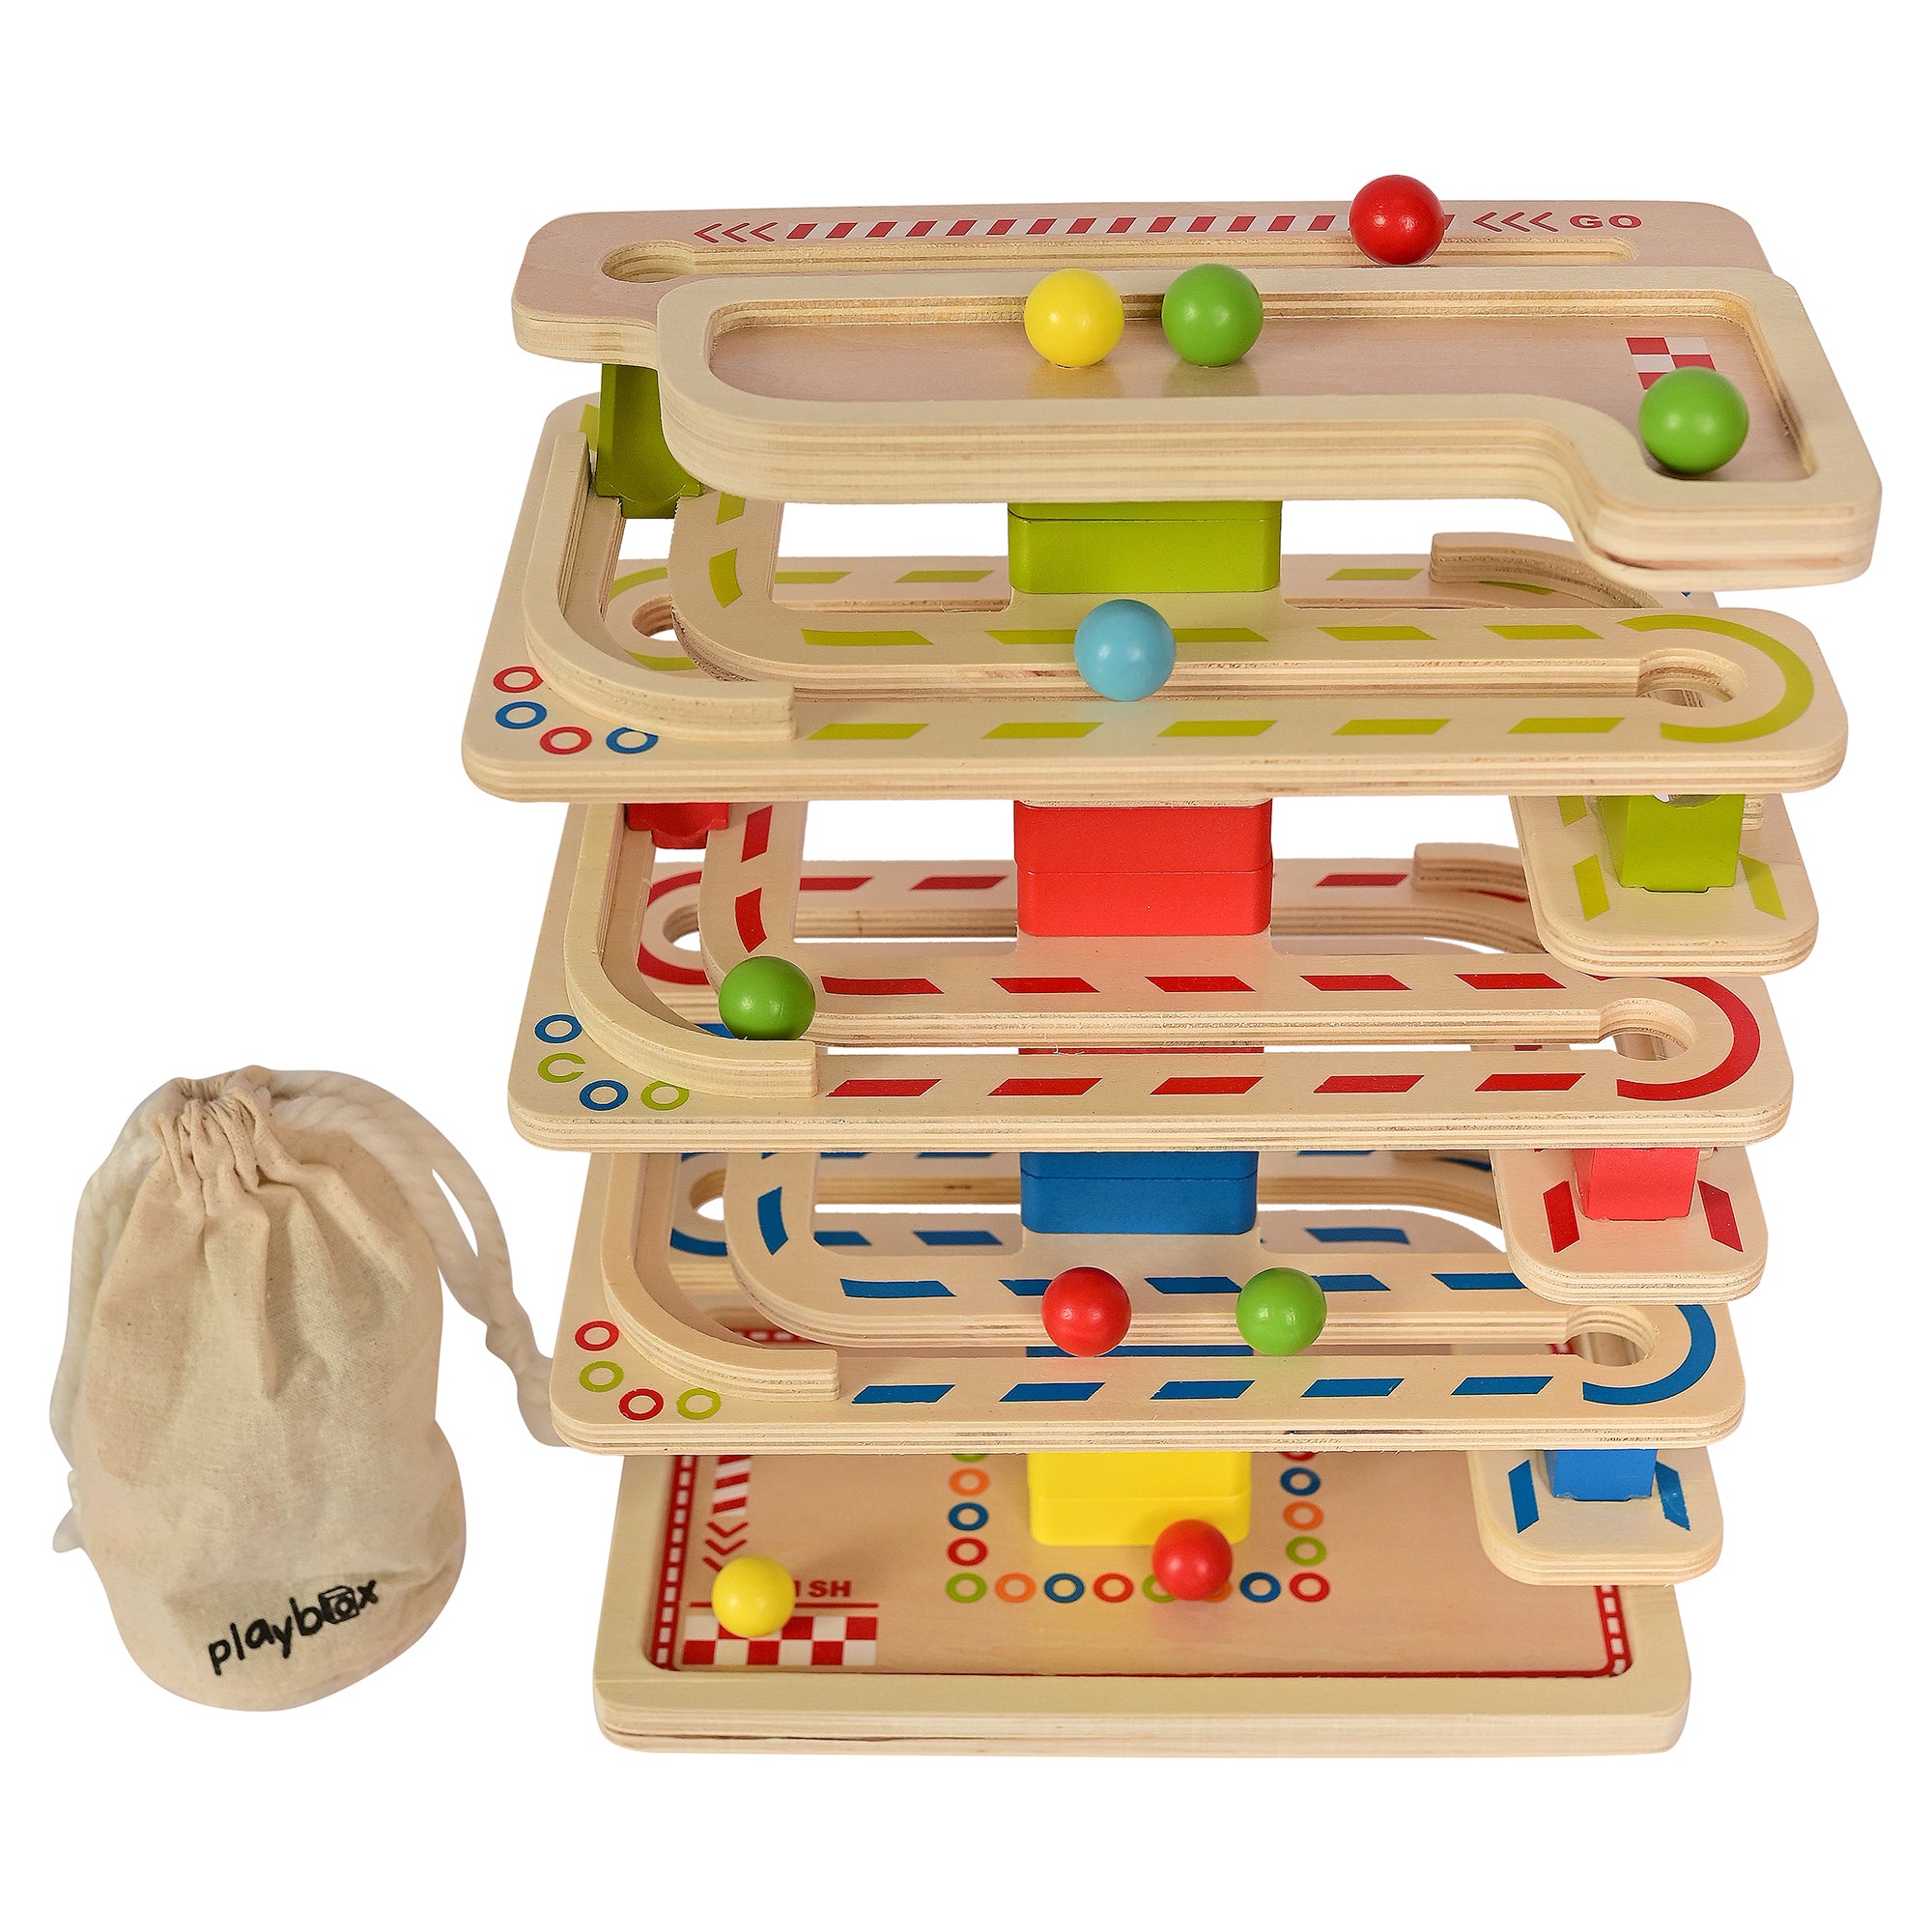 Roll The Ball - PlayBox